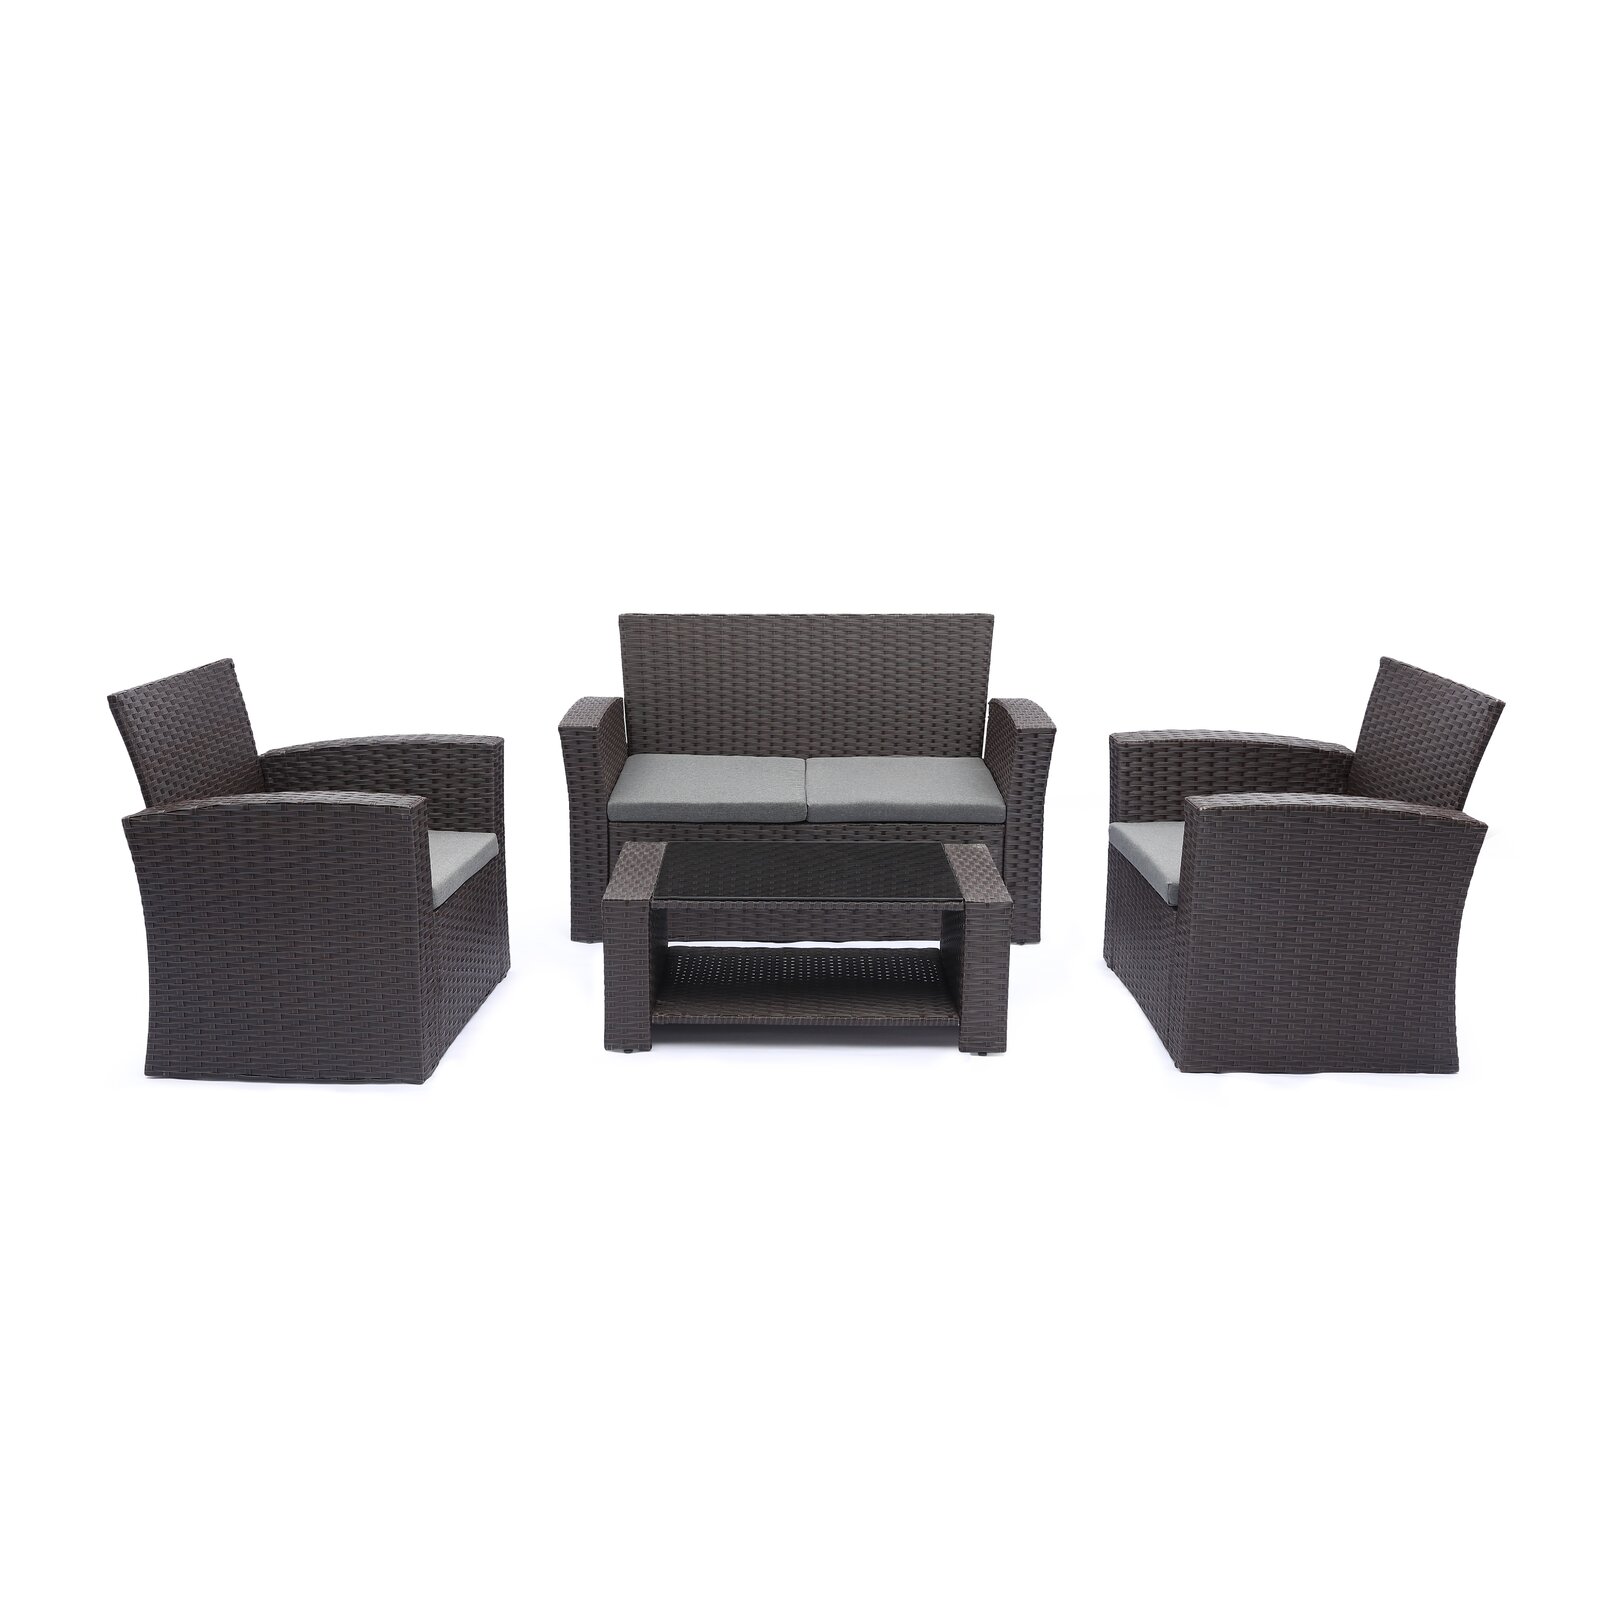 Ketillogh Wicker/Rattan 4 - Person Seating Group with Cushions, With Cushions, 2 Chair: Yes - image 5 of 5